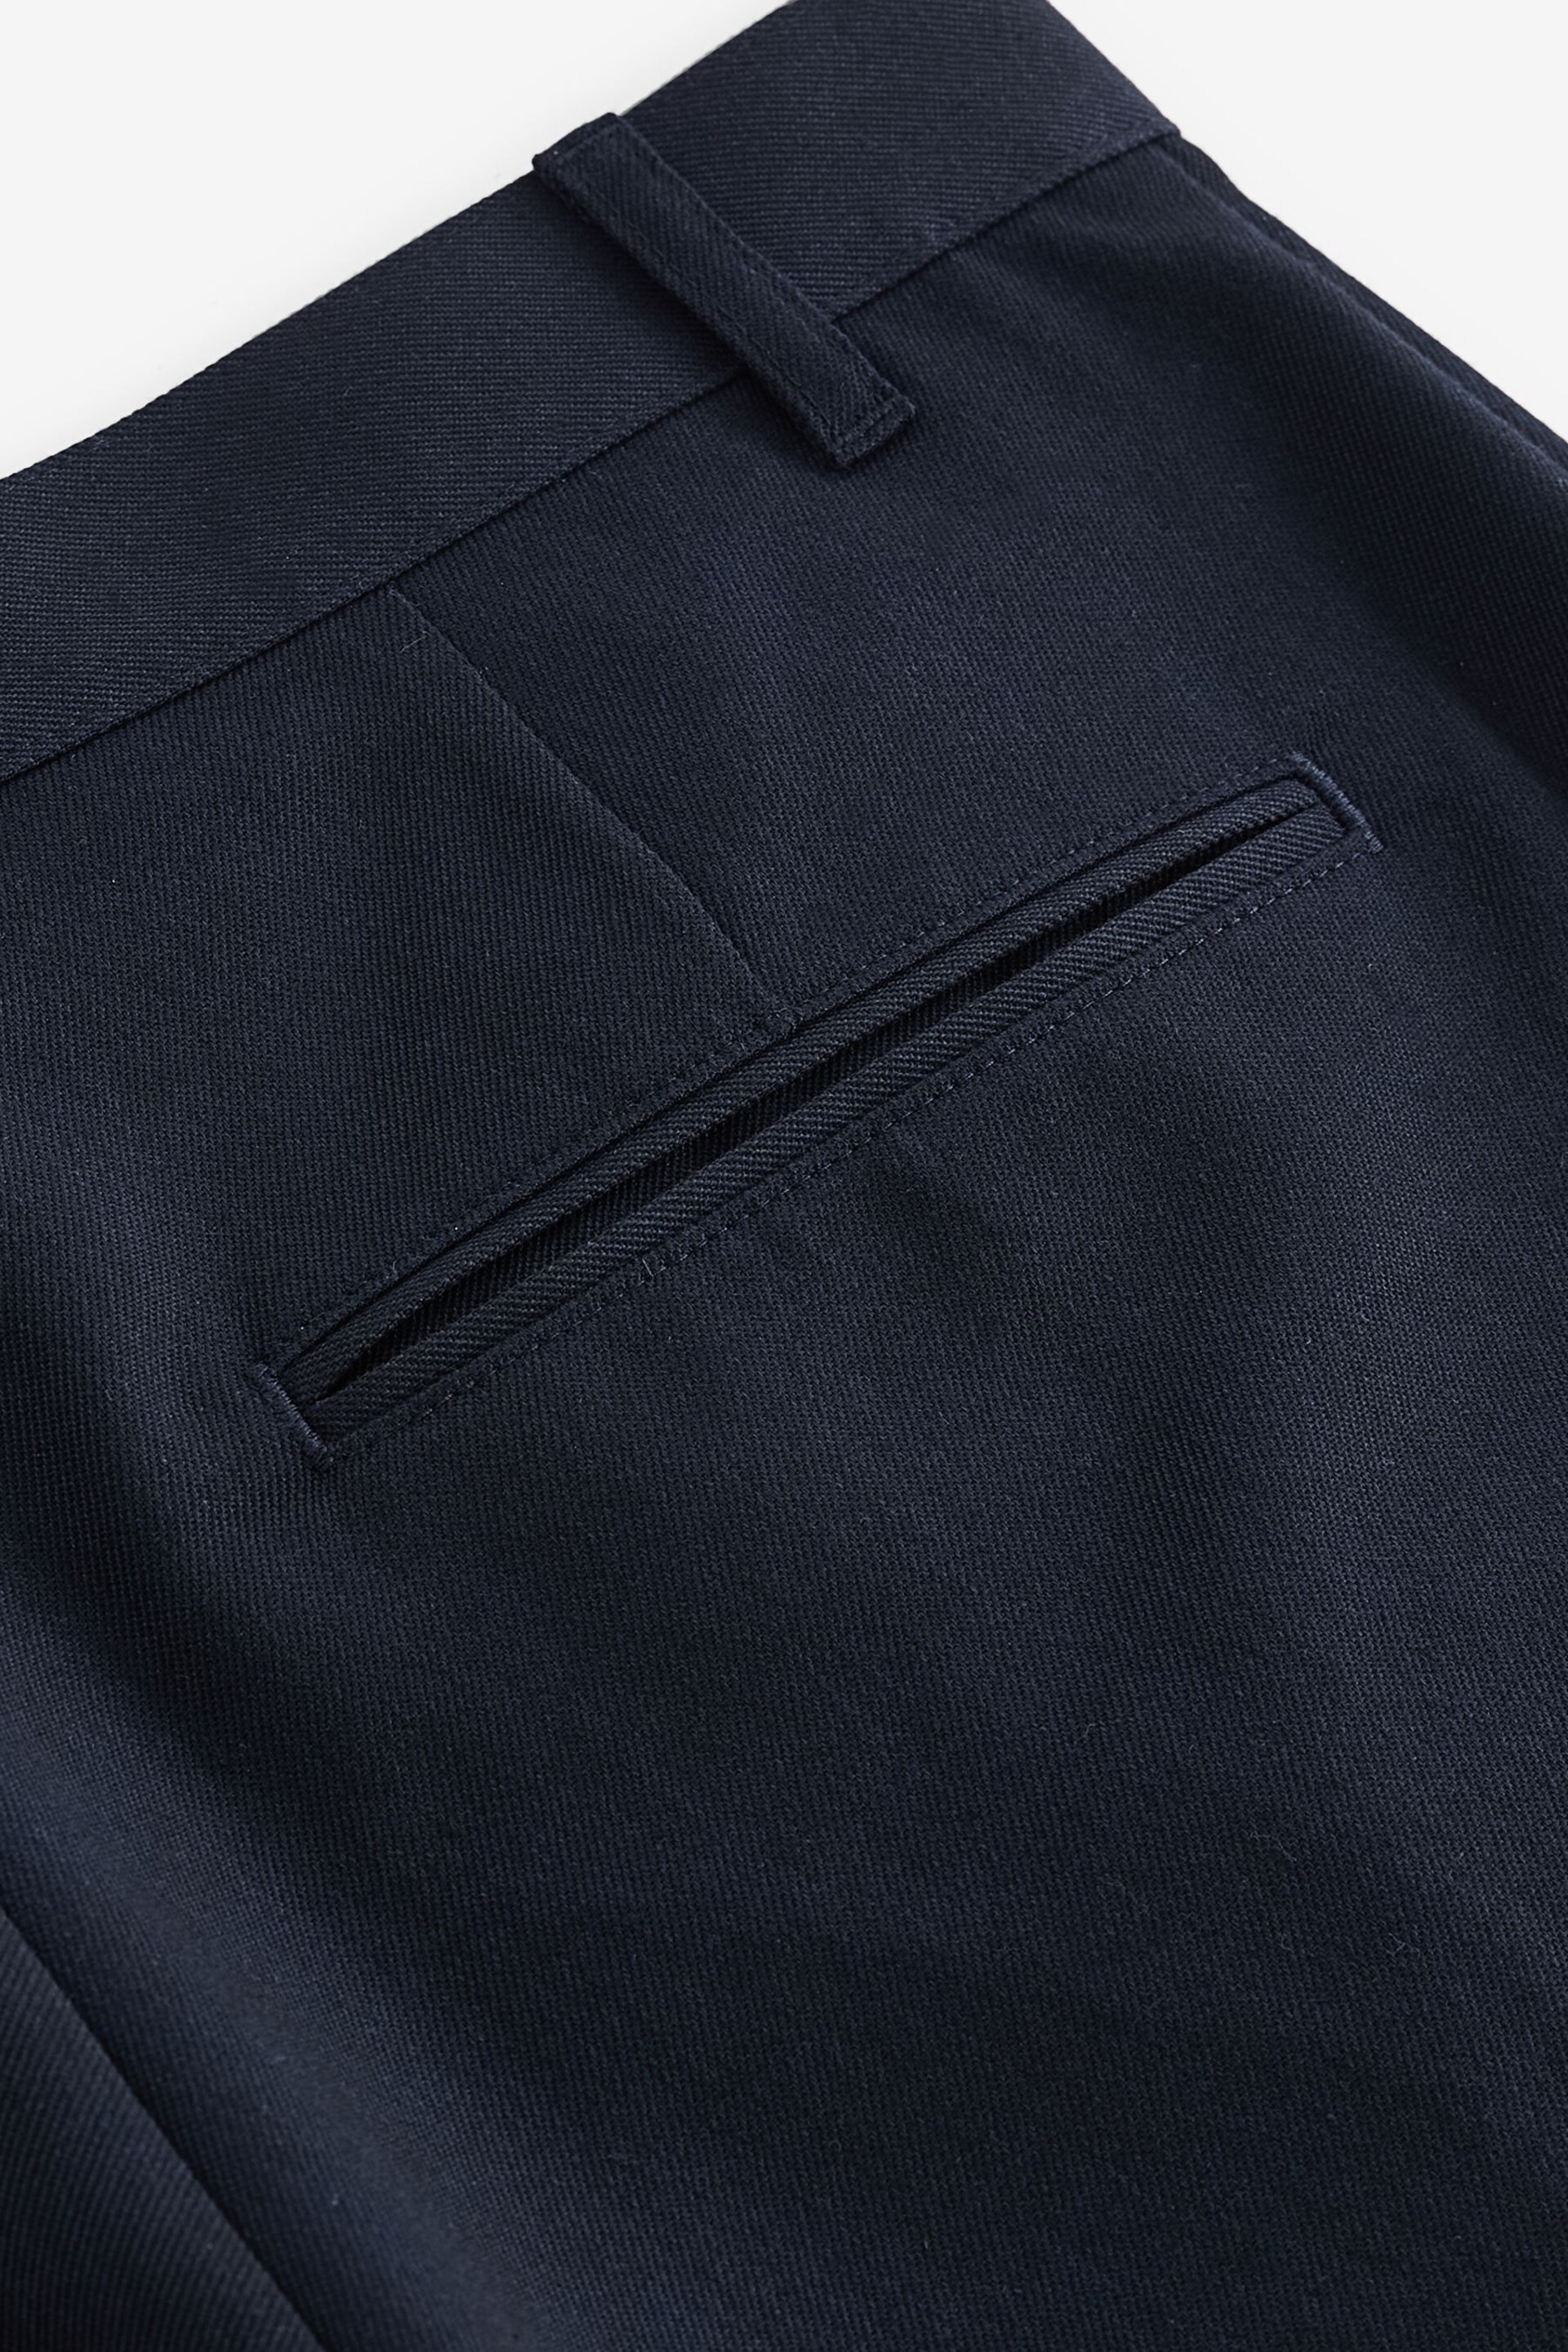 Navy Slim Plain Front Smart Trousers - Image 9 of 9